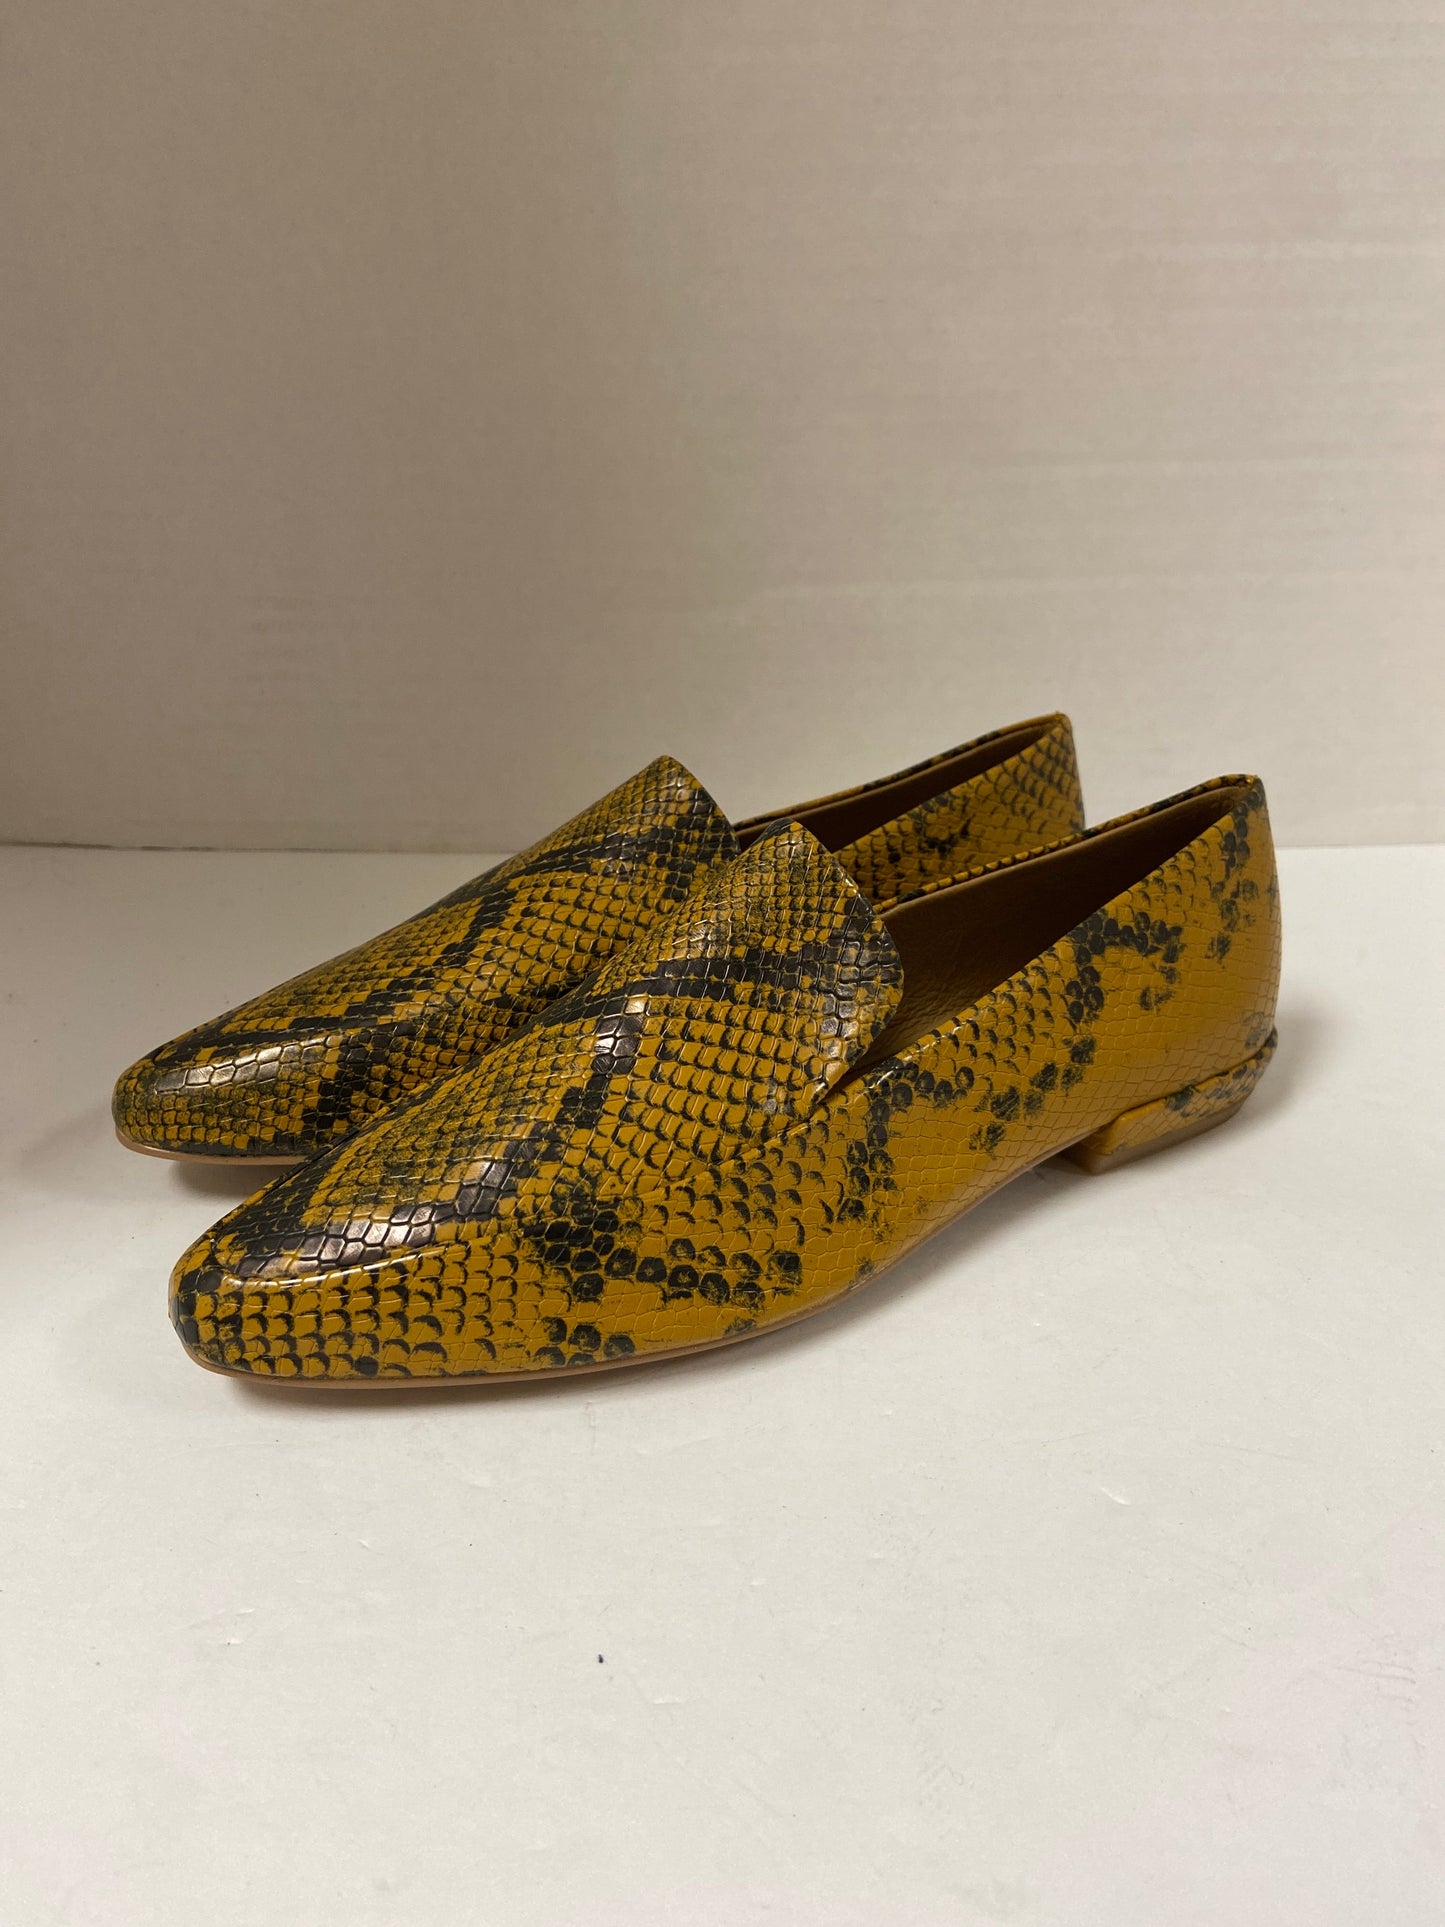 Shoes Flats Loafer Oxford By Steve Madden  Size: 6